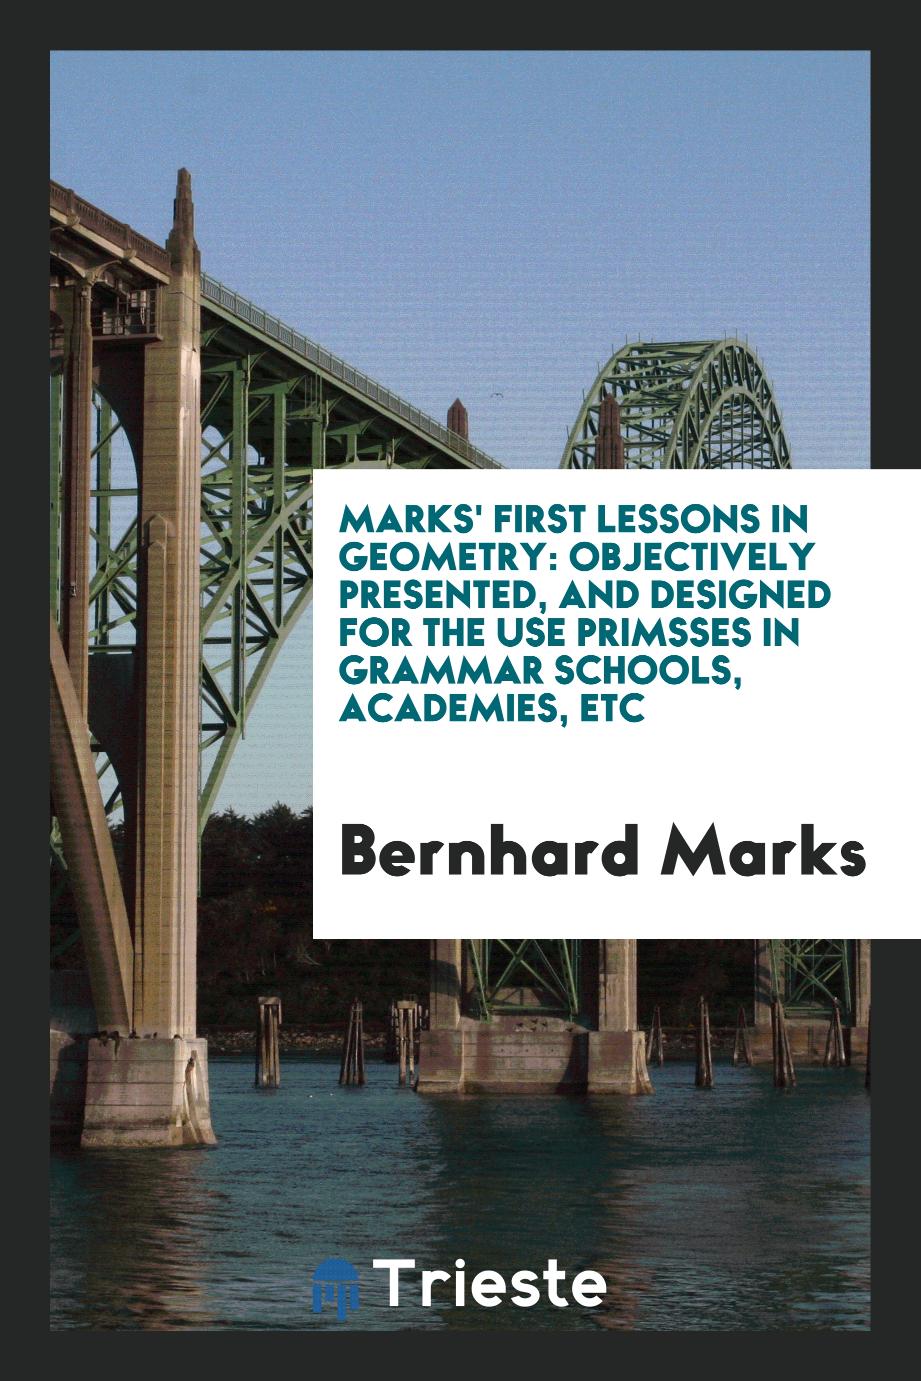 Marks' First Lessons in Geometry: Objectively Presented, and Designed for the Use Primsses in Grammar Schools, Academies, Etc